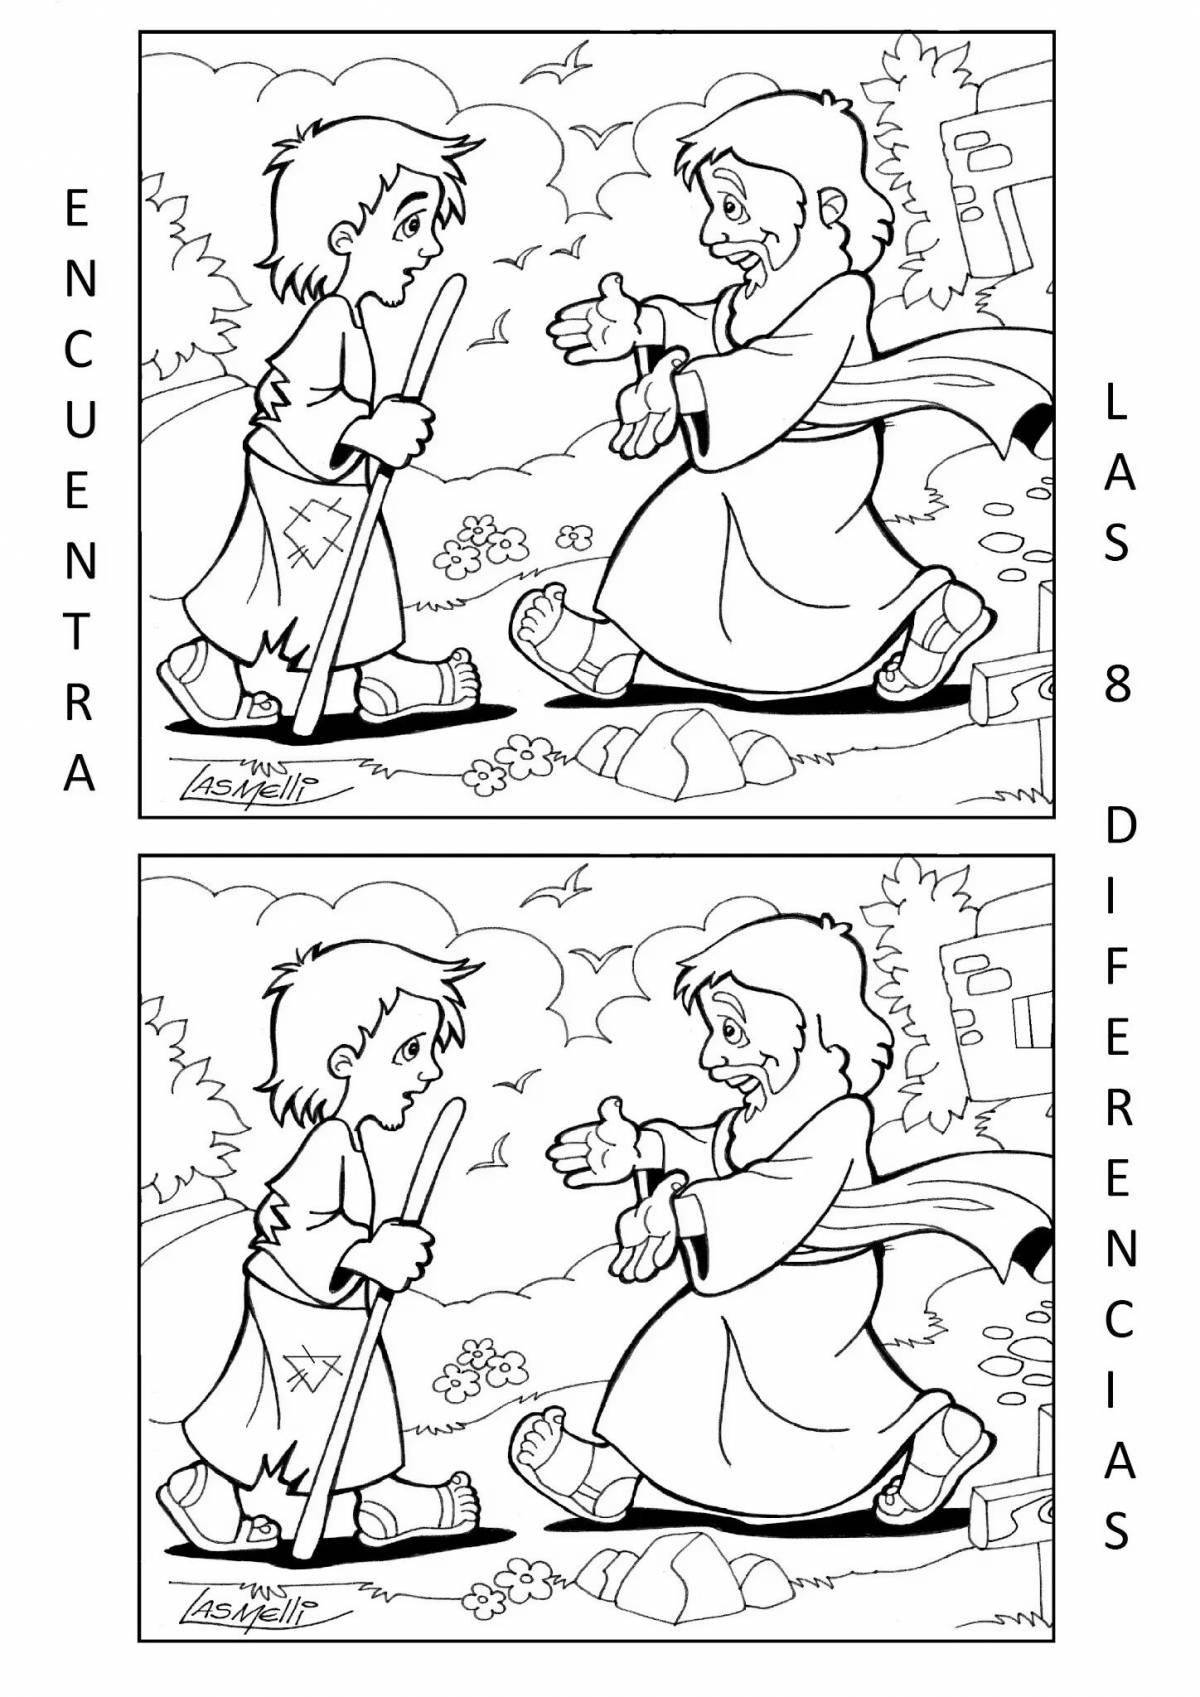 Coloring page of the week of the magical prodigal son